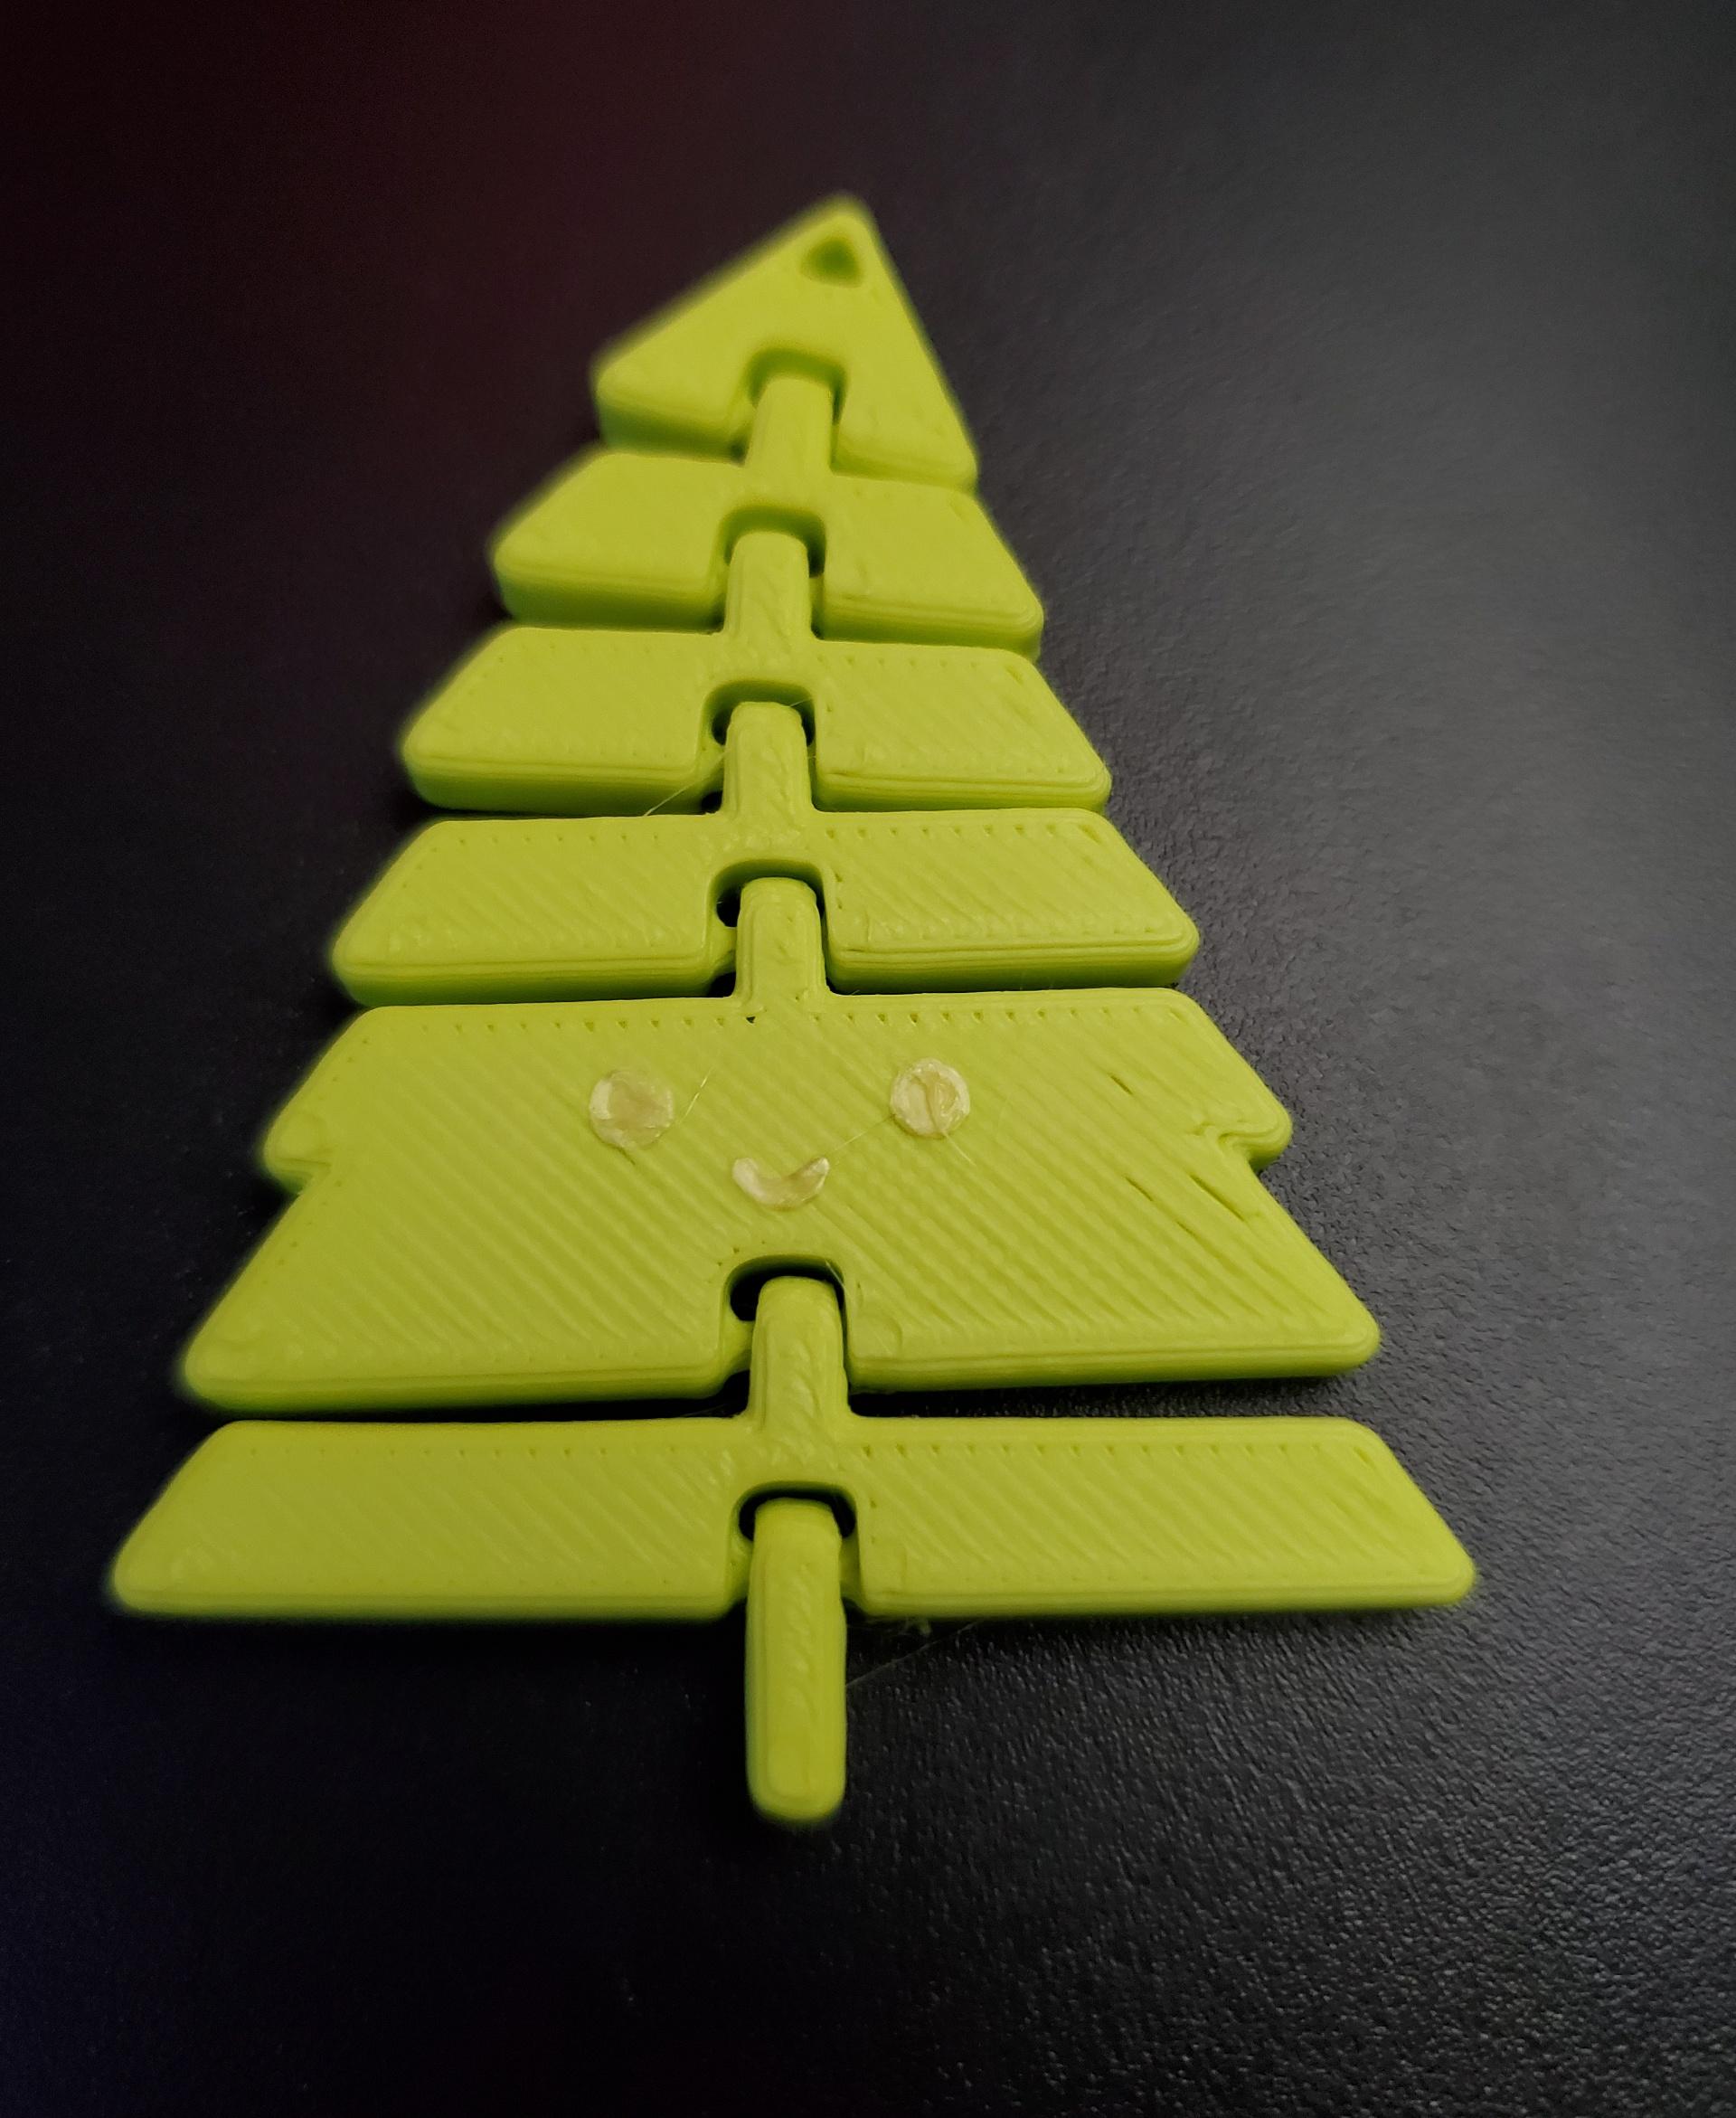 Articulated Kawaii Christmas Tree Keychain - Print in place fidget toy - 3mf - polyterra lime green - 3d model